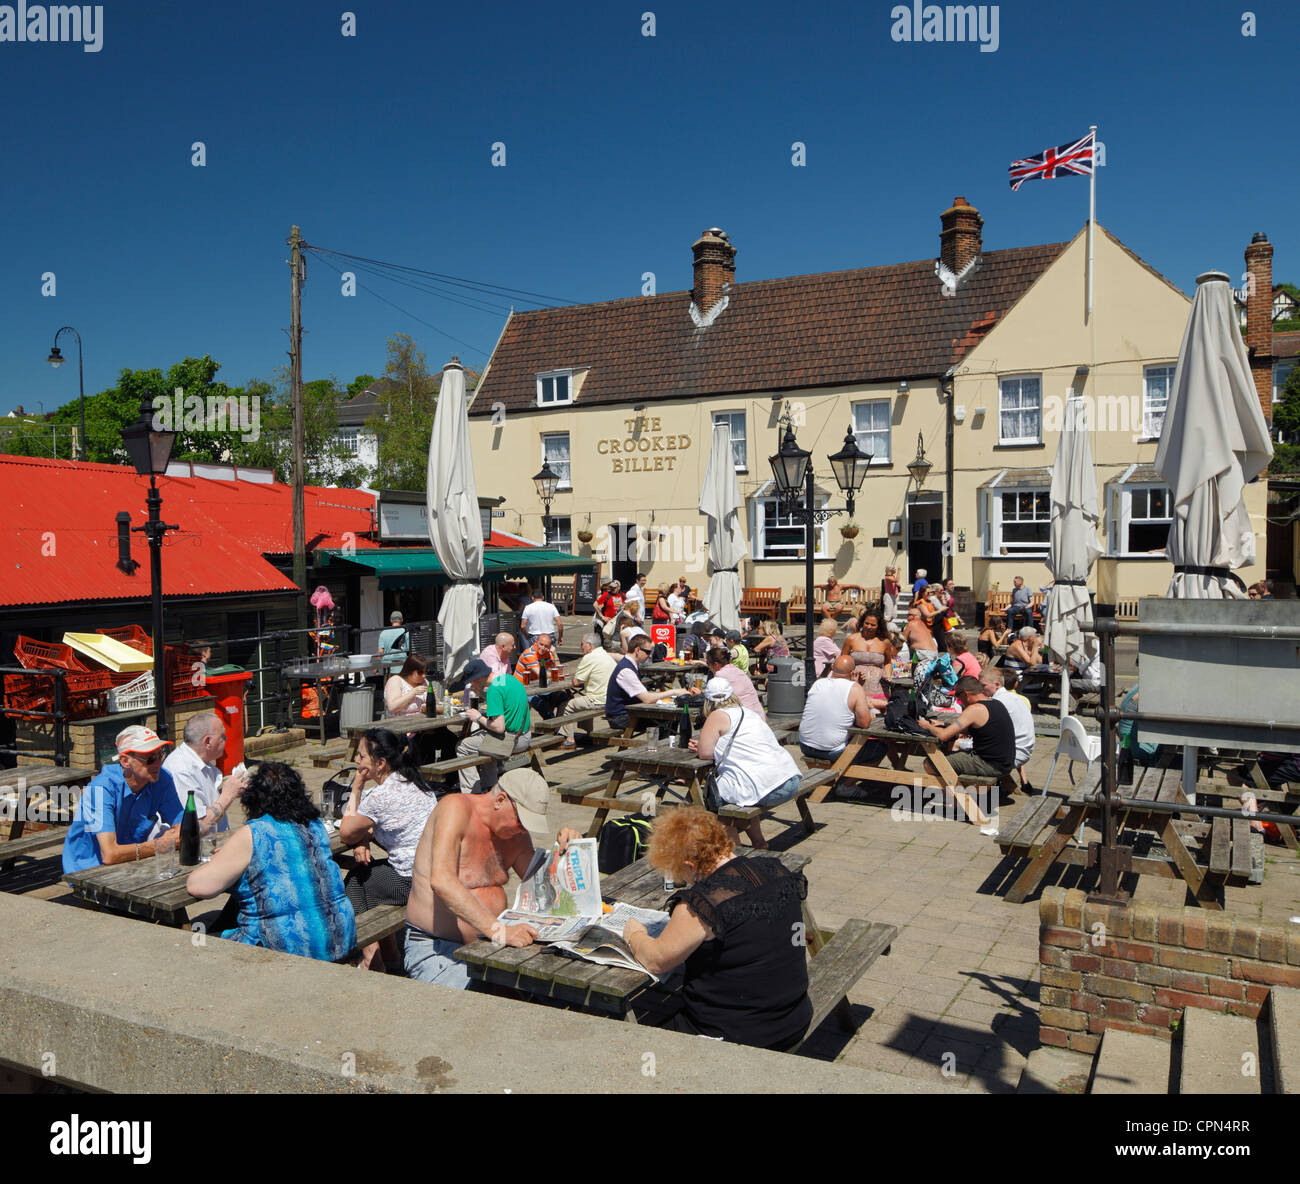 Leigh on Sea, Crooked Billet public house. Banque D'Images